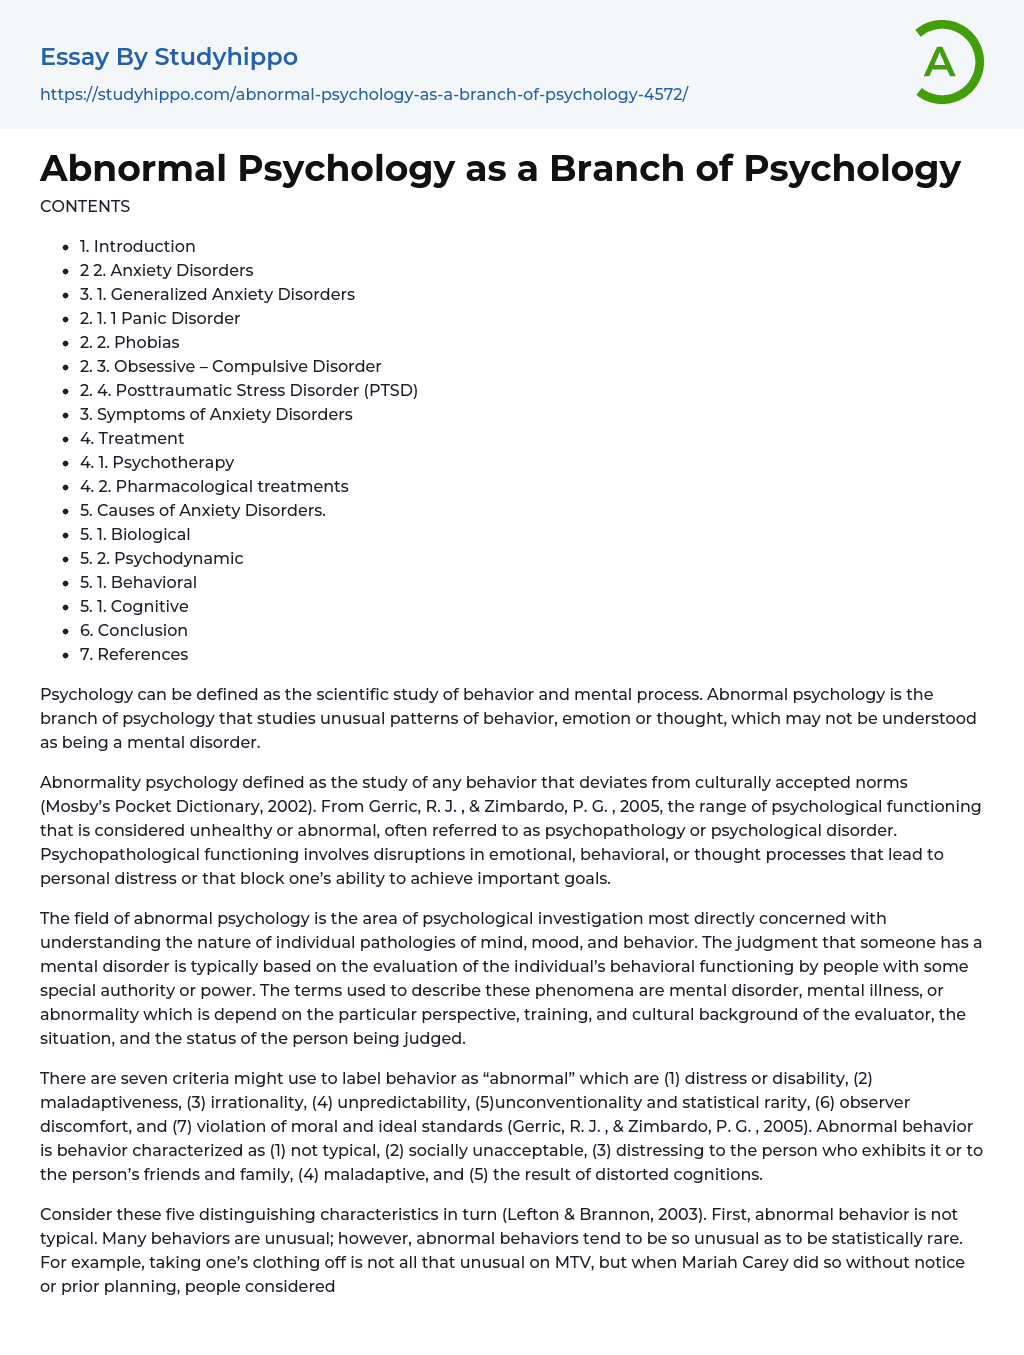 Abnormal Psychology as a Branch of Psychology Essay Example